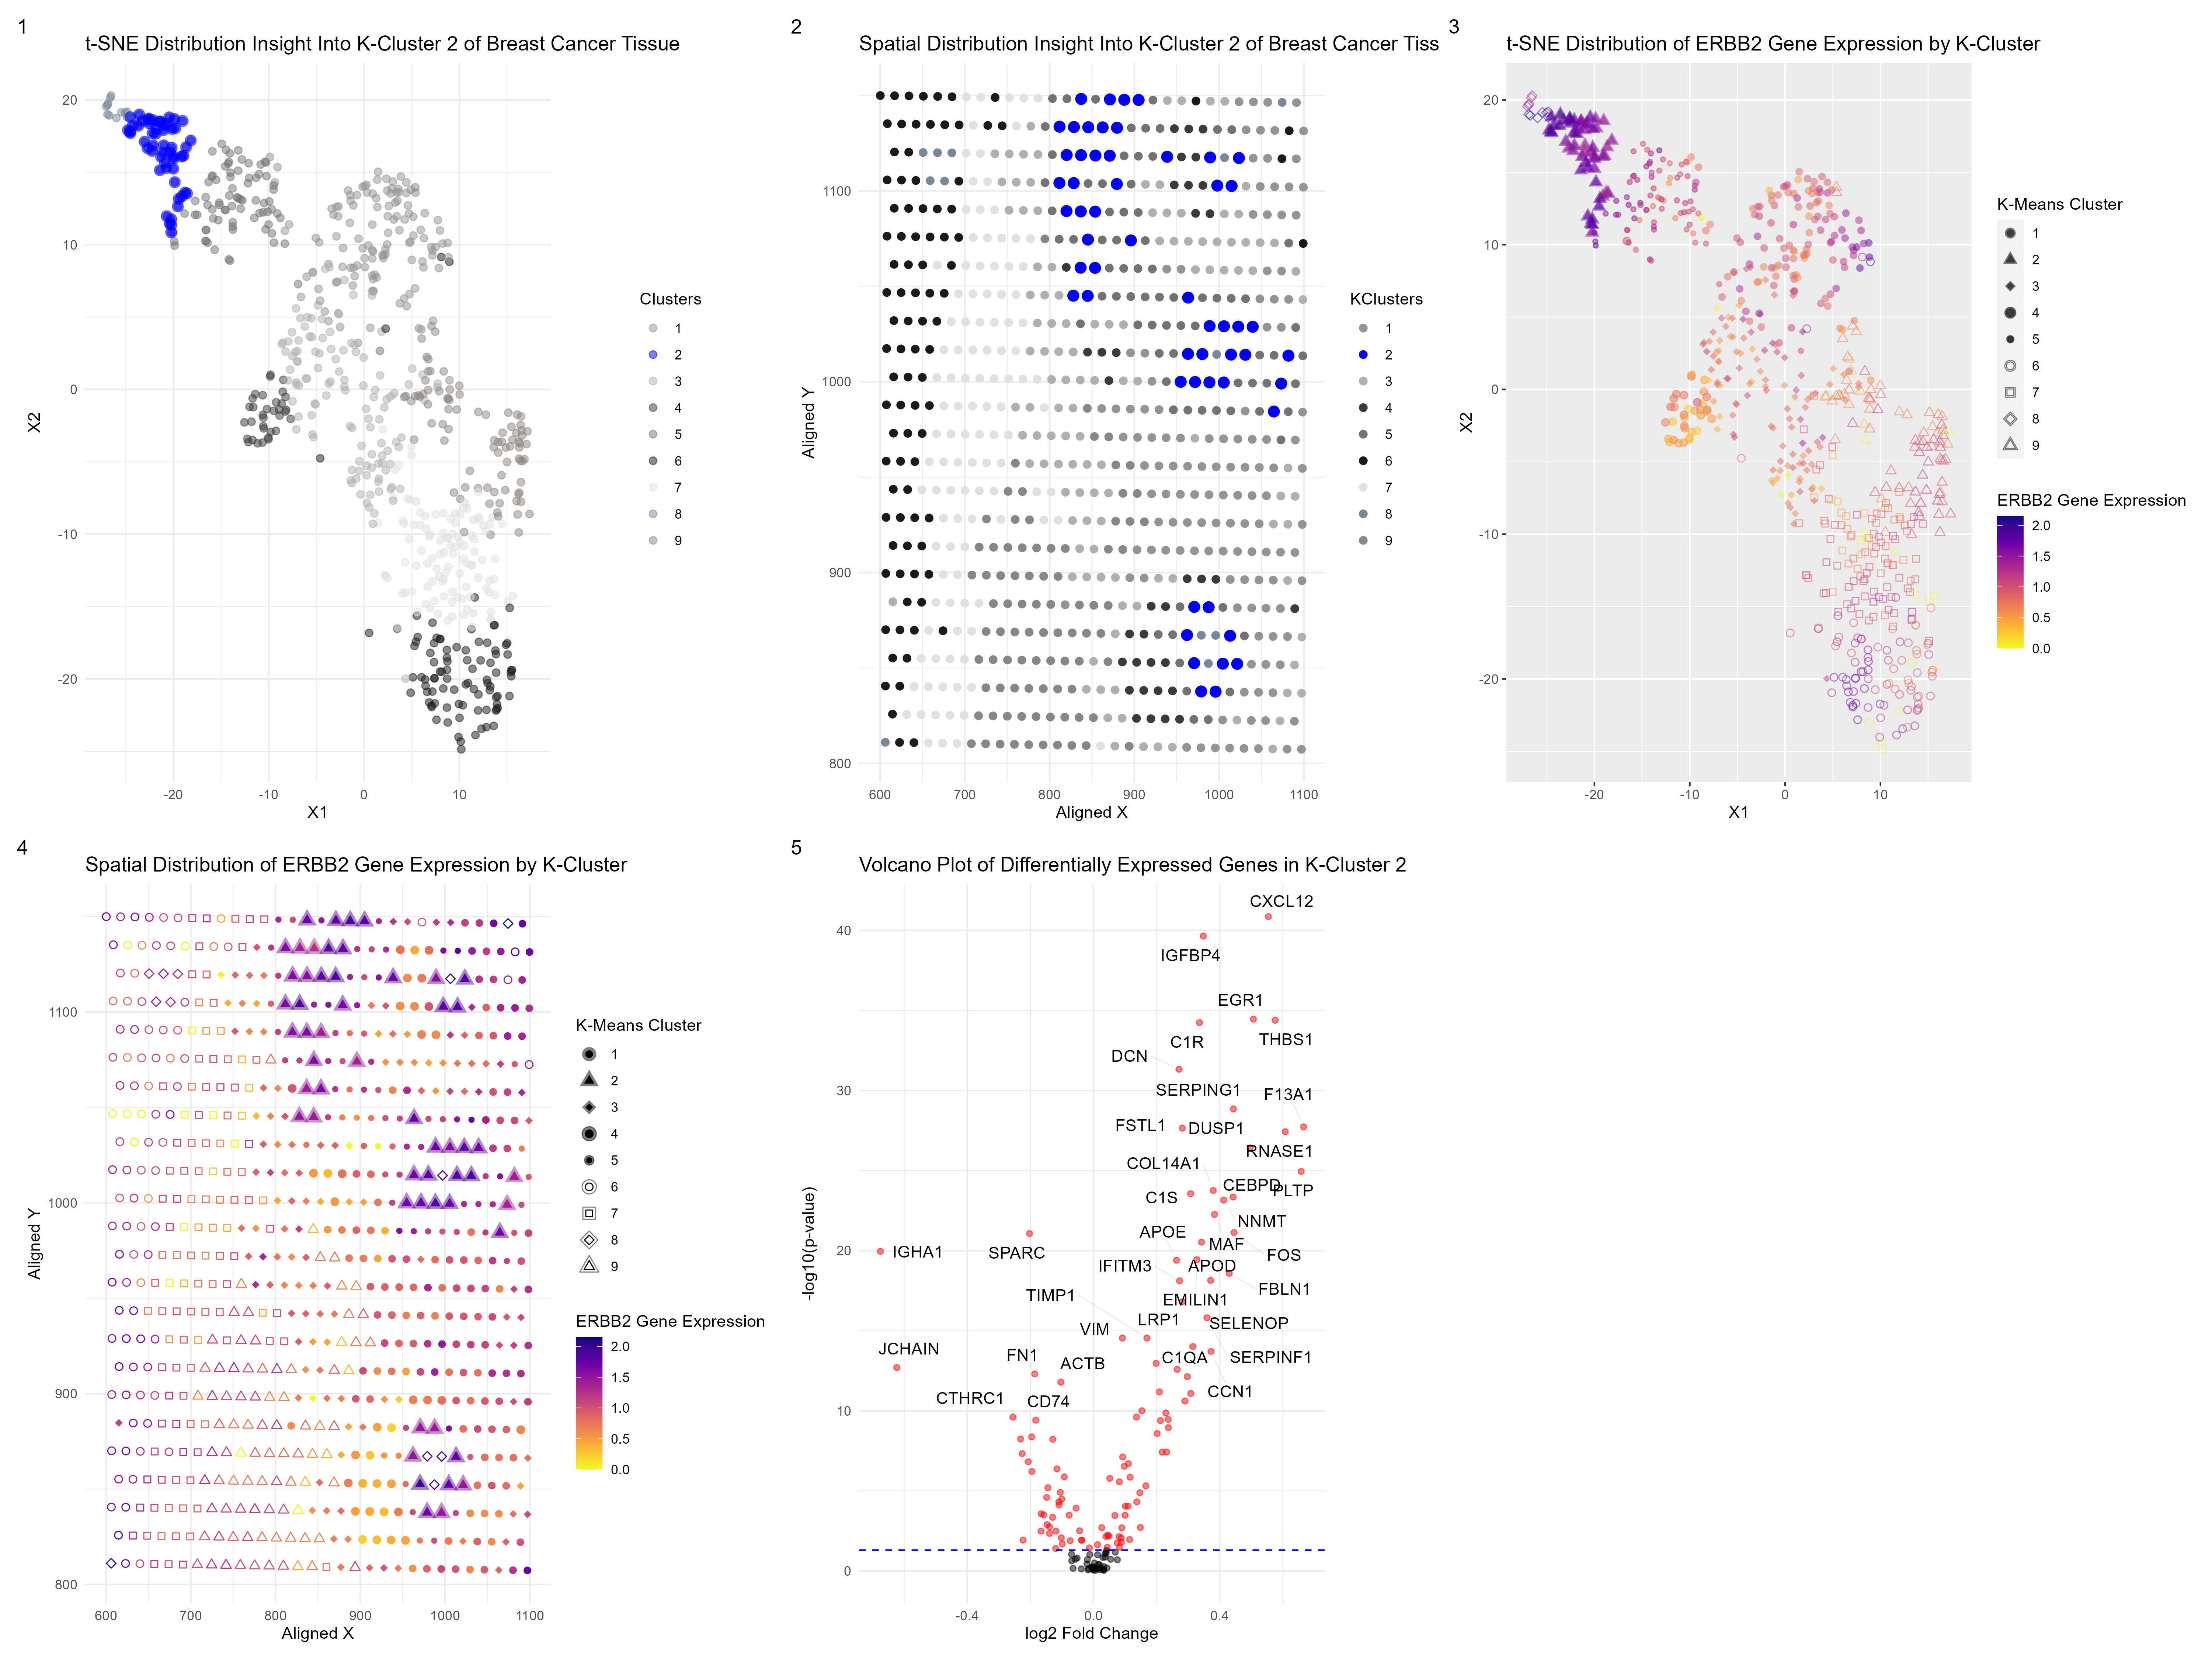 Identifying Differentially Expressed Genes in Breast Cancer Tissue Through K-Means Cluster Analysis